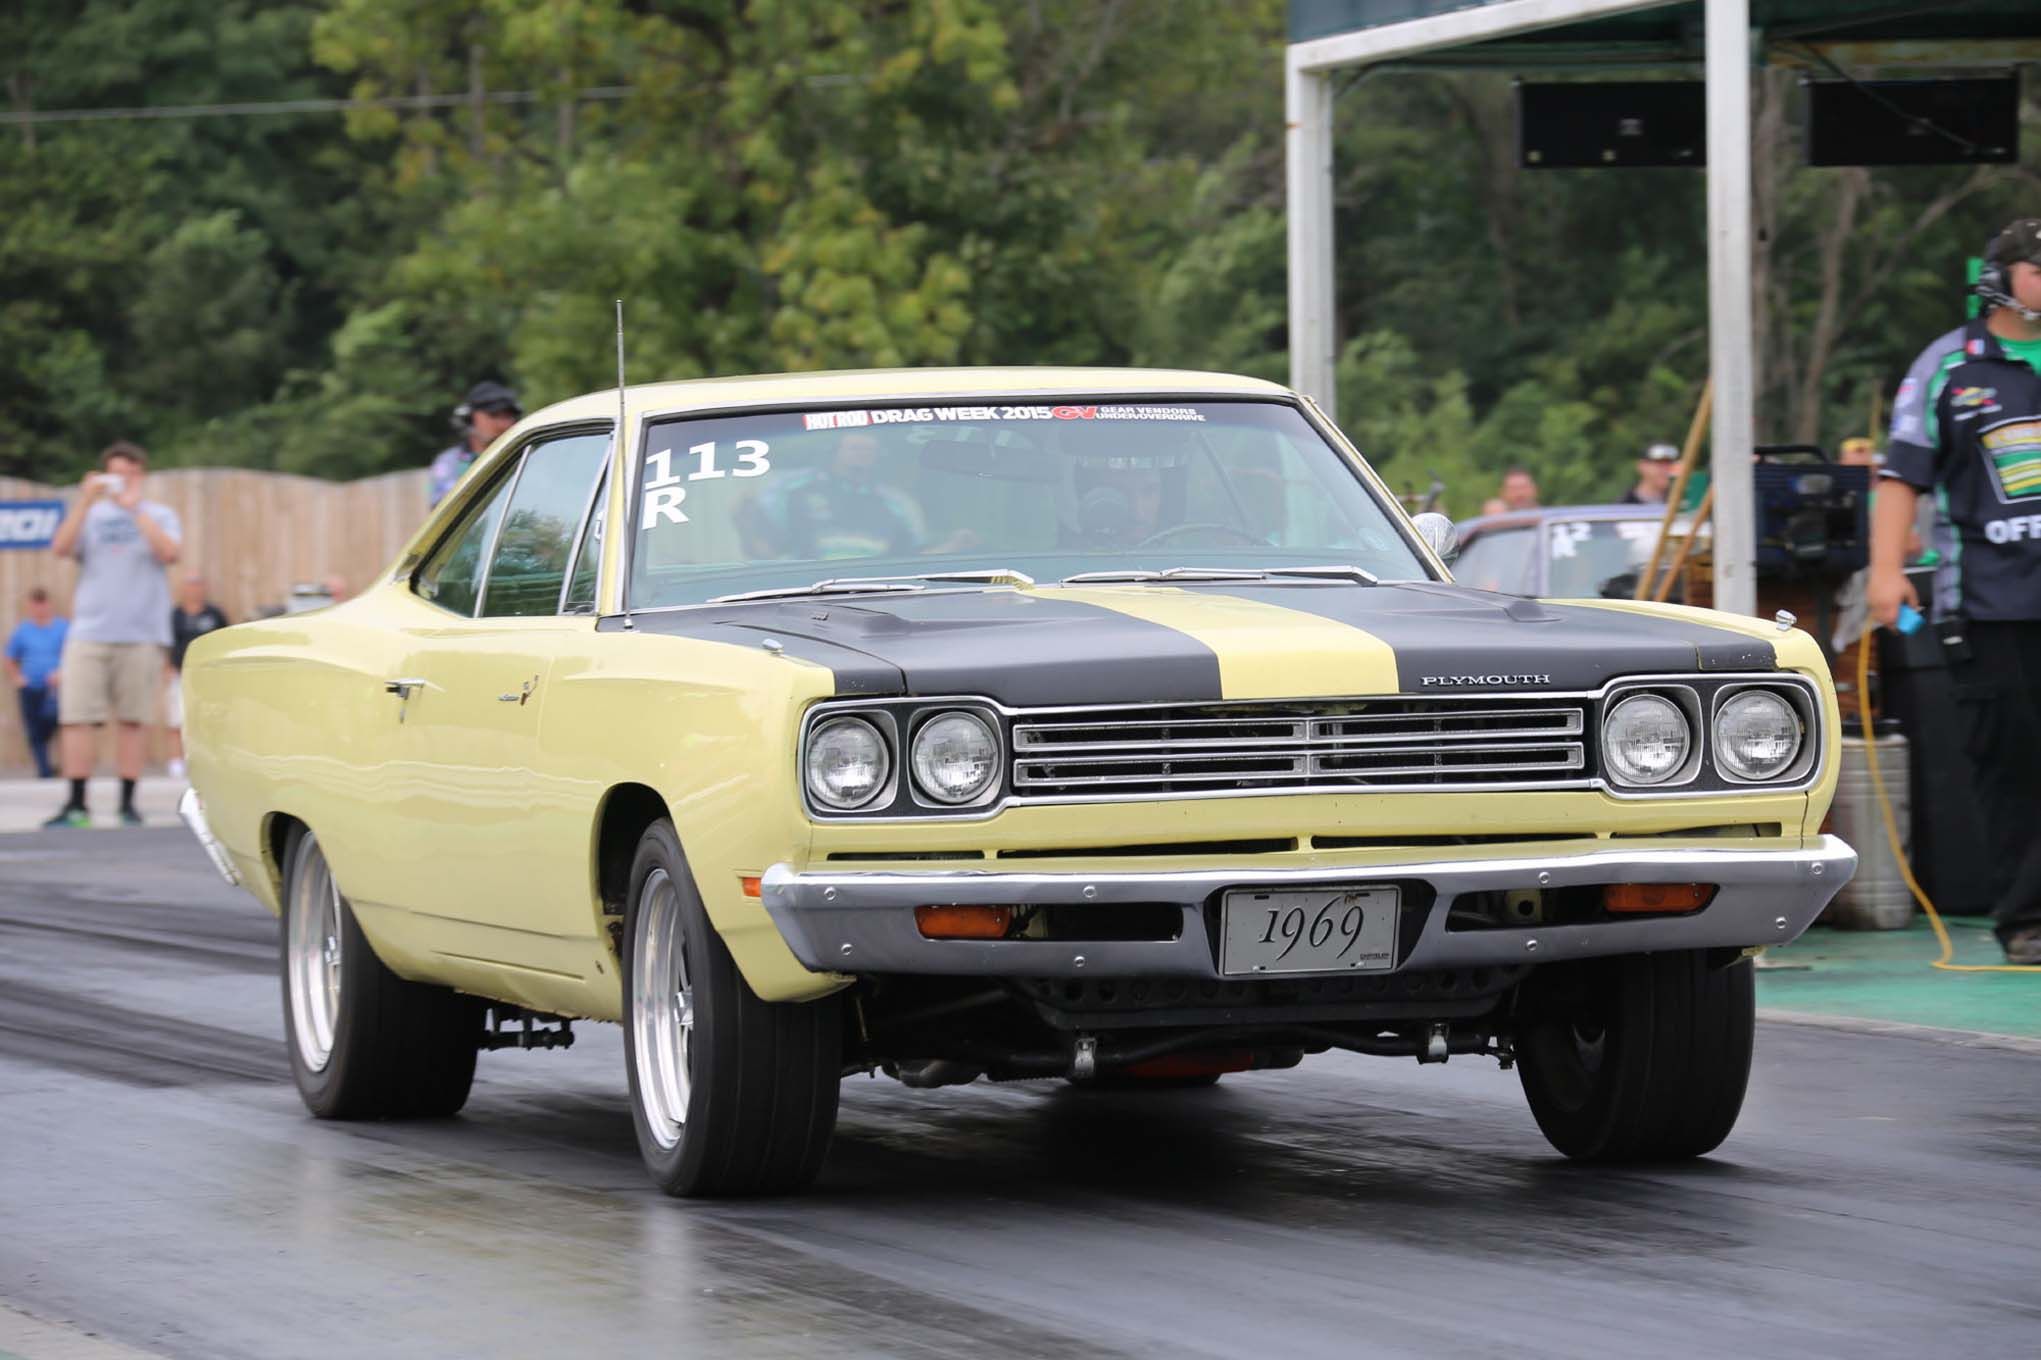 Attached picture 148-drag-week-day-4-race-cordova-lpr - Copy.jpg